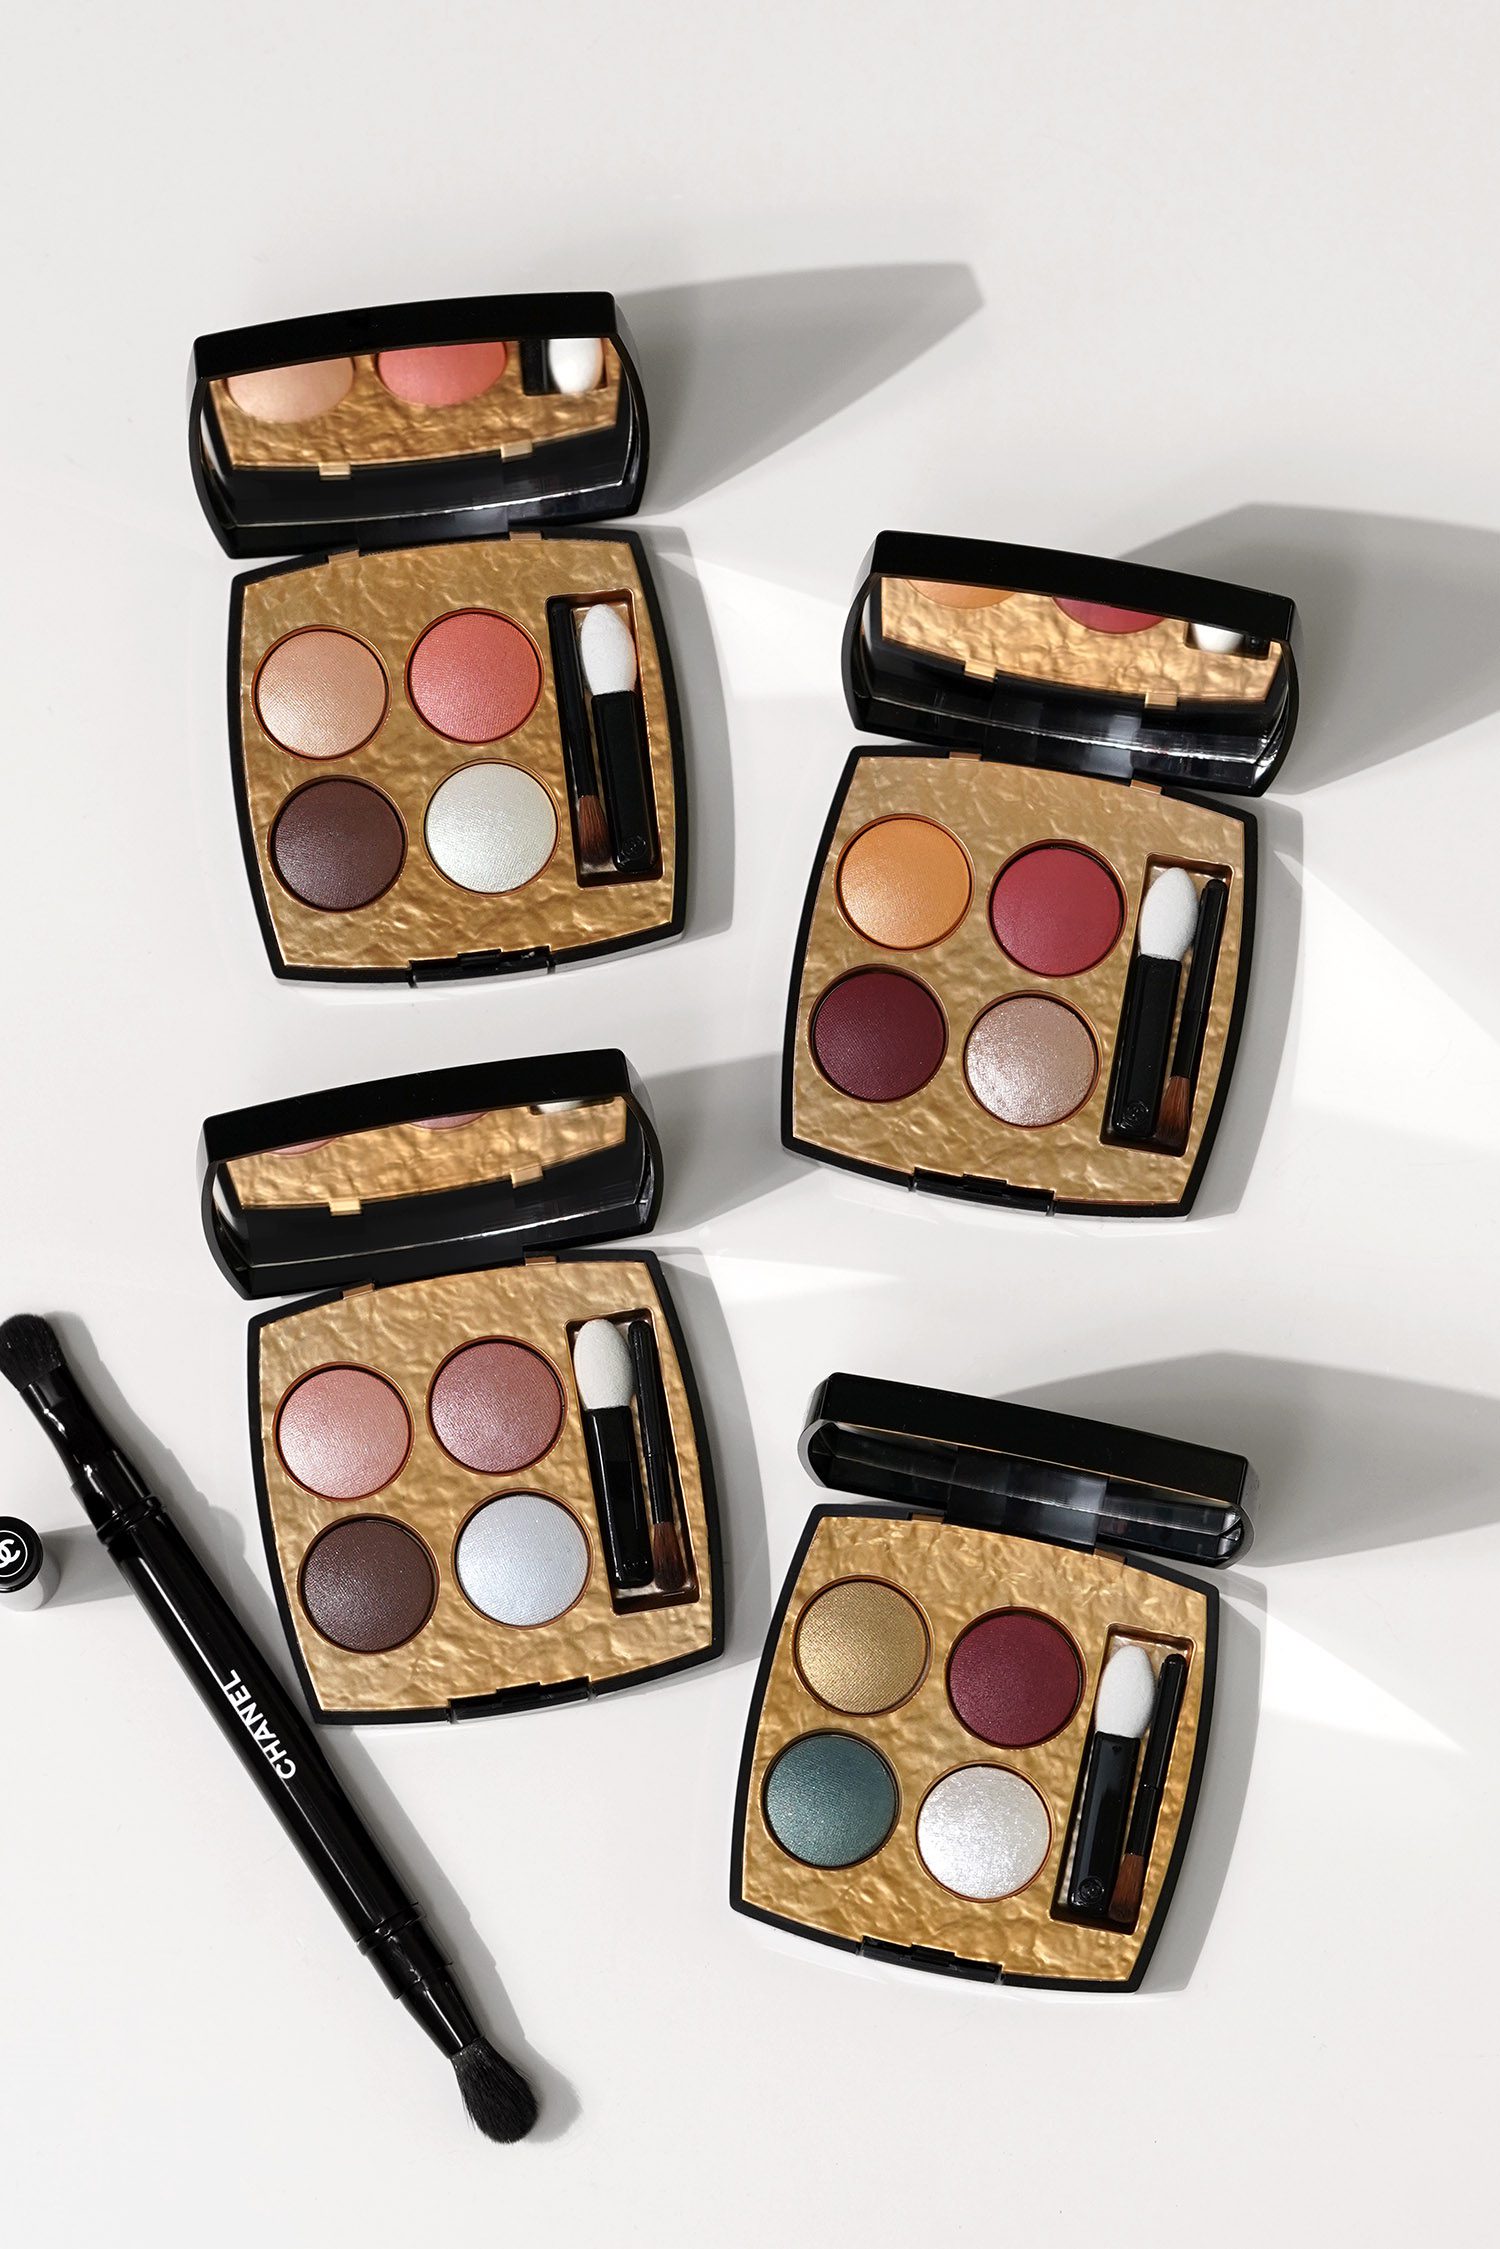 Chanel Les 4 Ombres Byzance - The Beauty Look Book